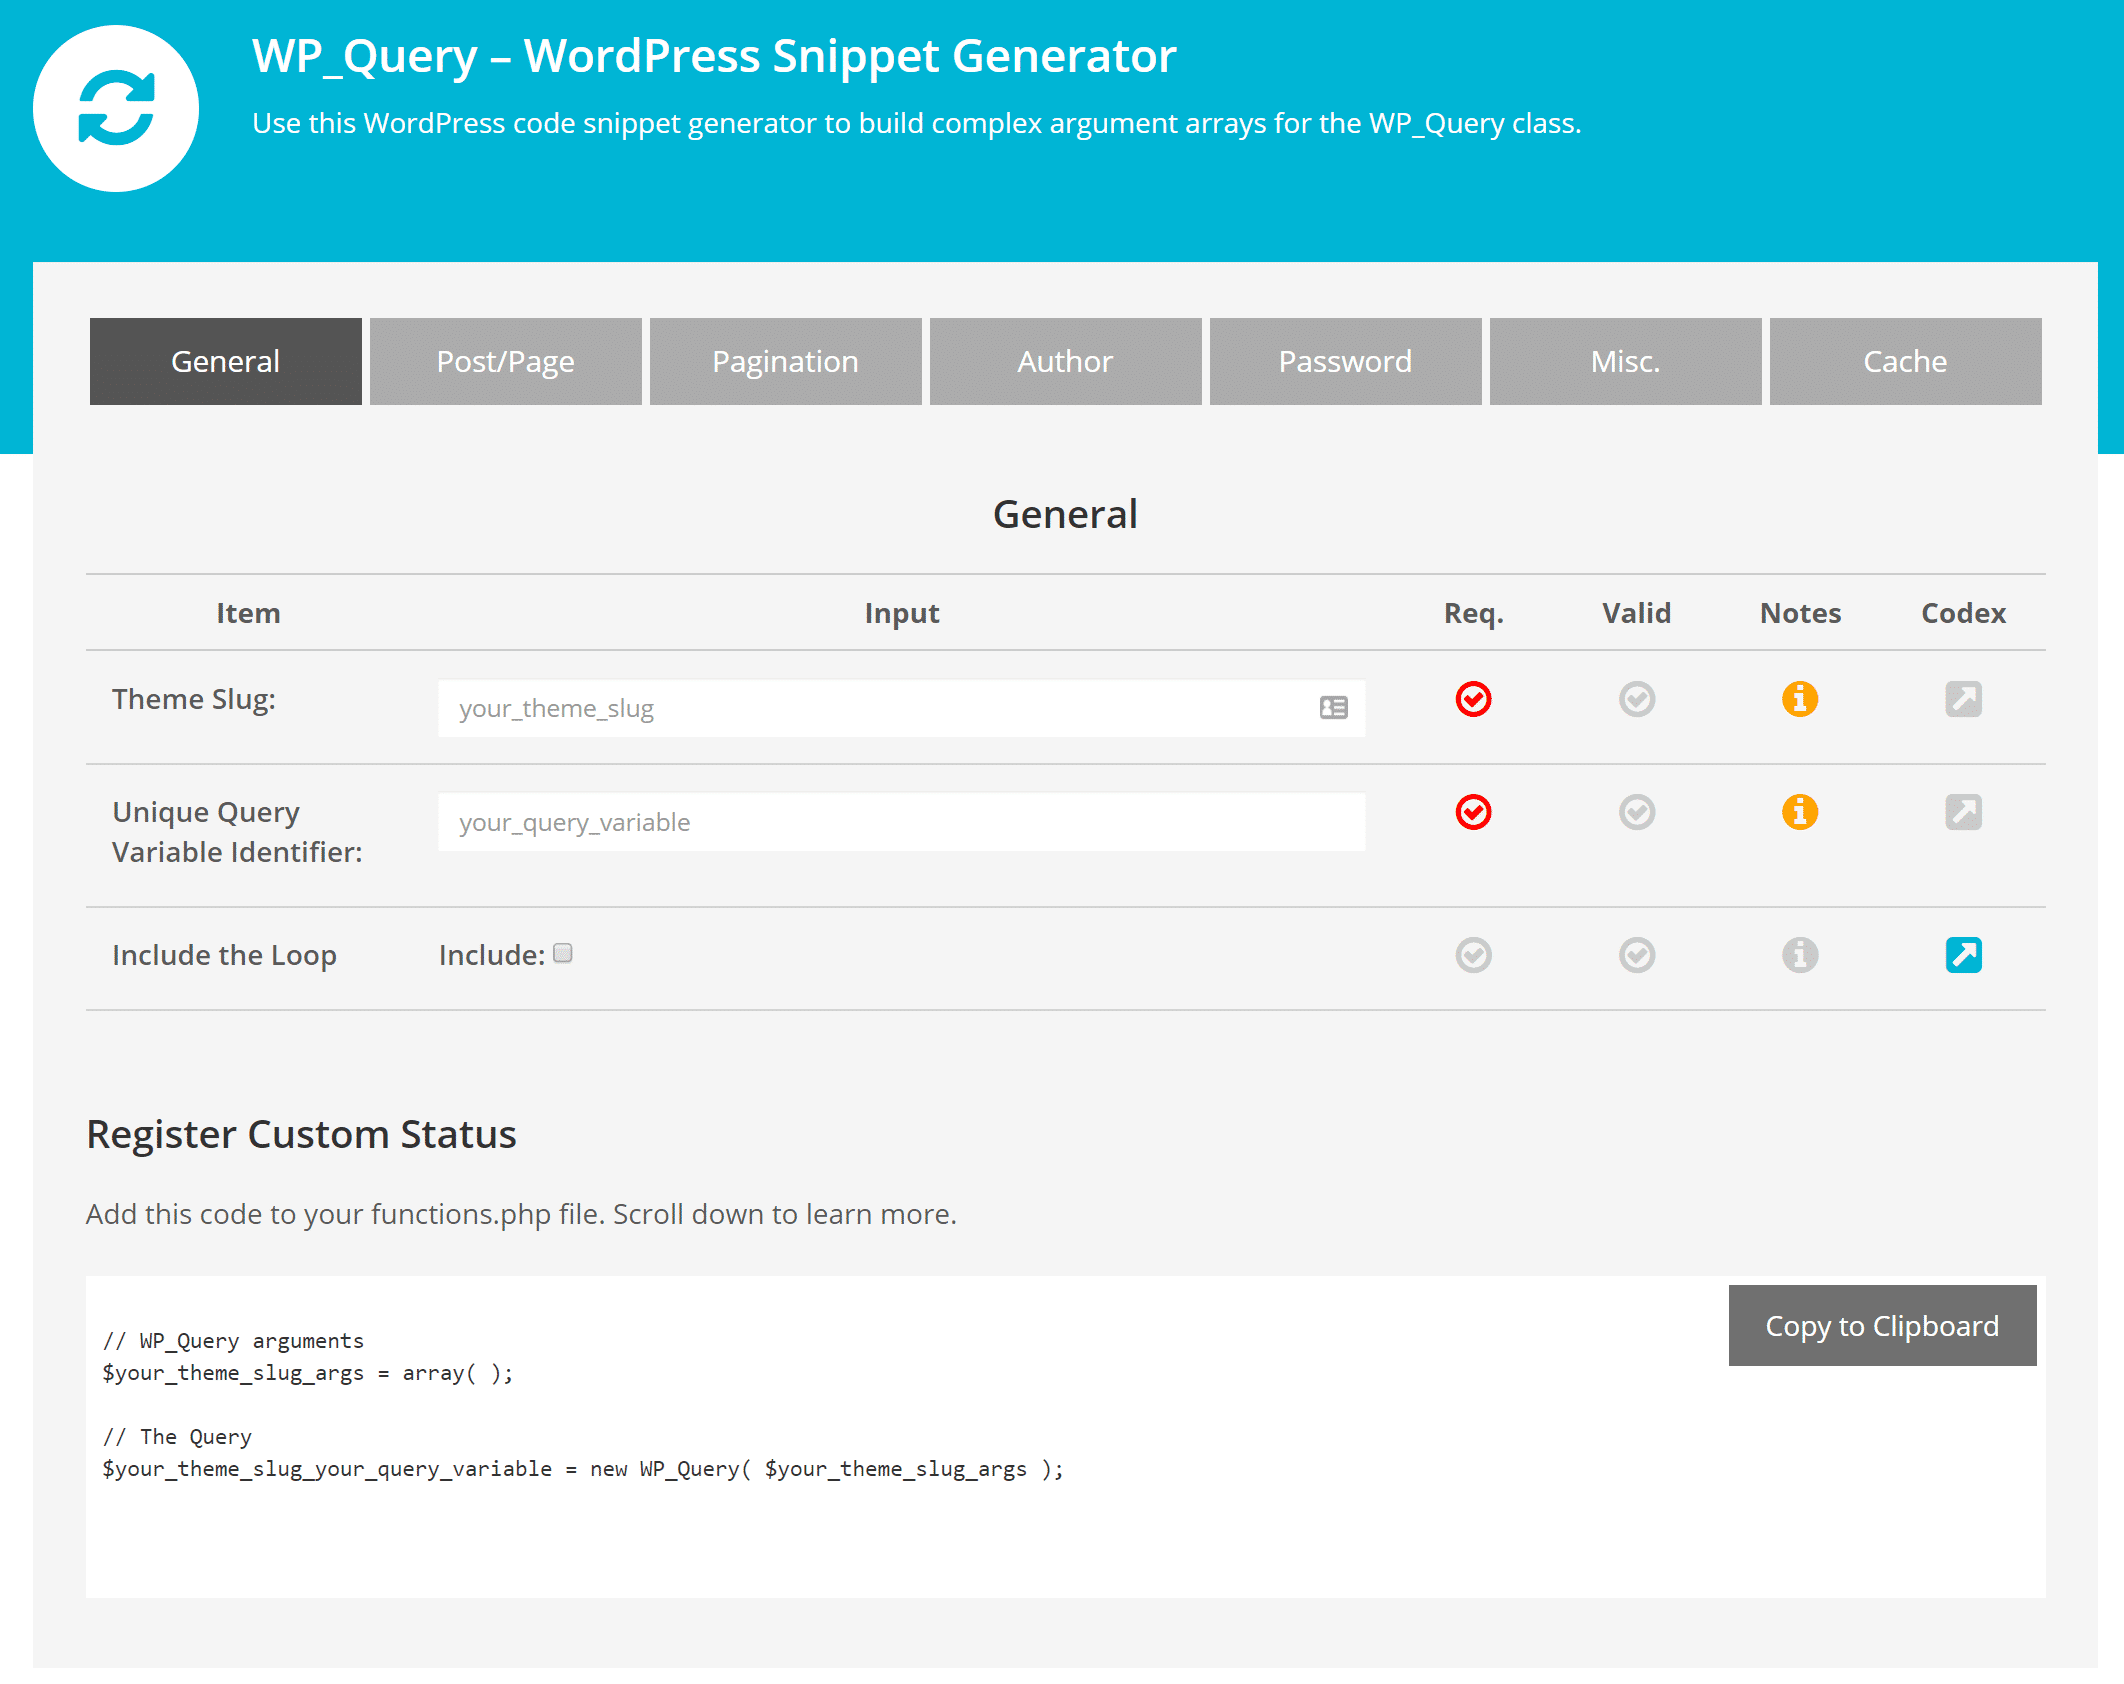 wp_query snippet generator